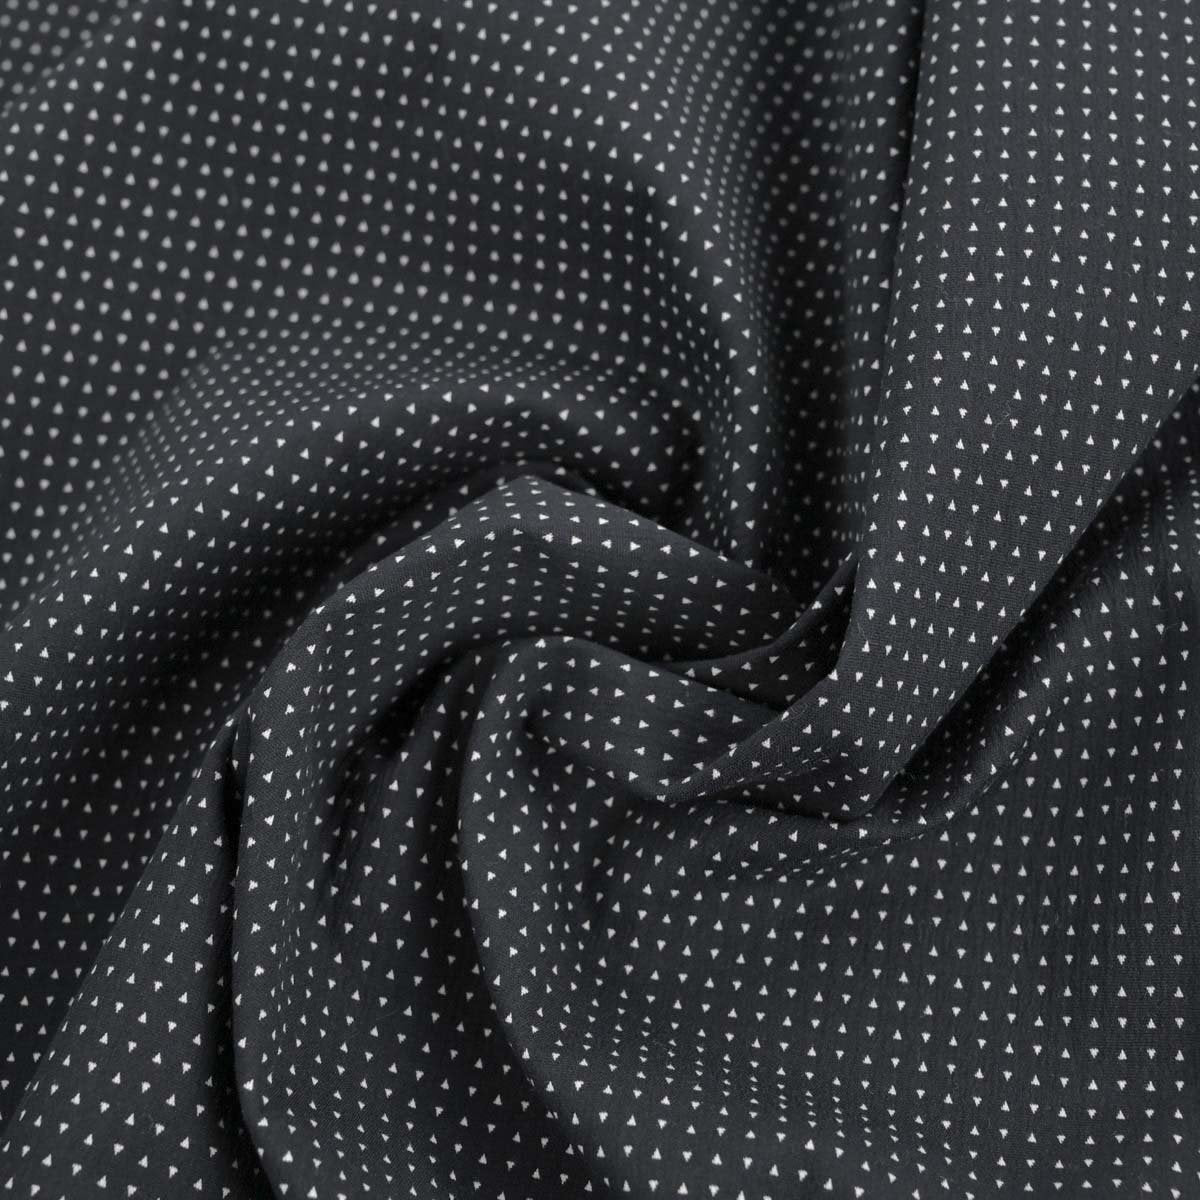 Black Jacquard Fabric, 3D Creases Fold Fabric, Pleated Texture Dust Coat  Fabric, Wrinkled Dress Fabric, Designer Fabric, by the Meter, D105 -   Canada